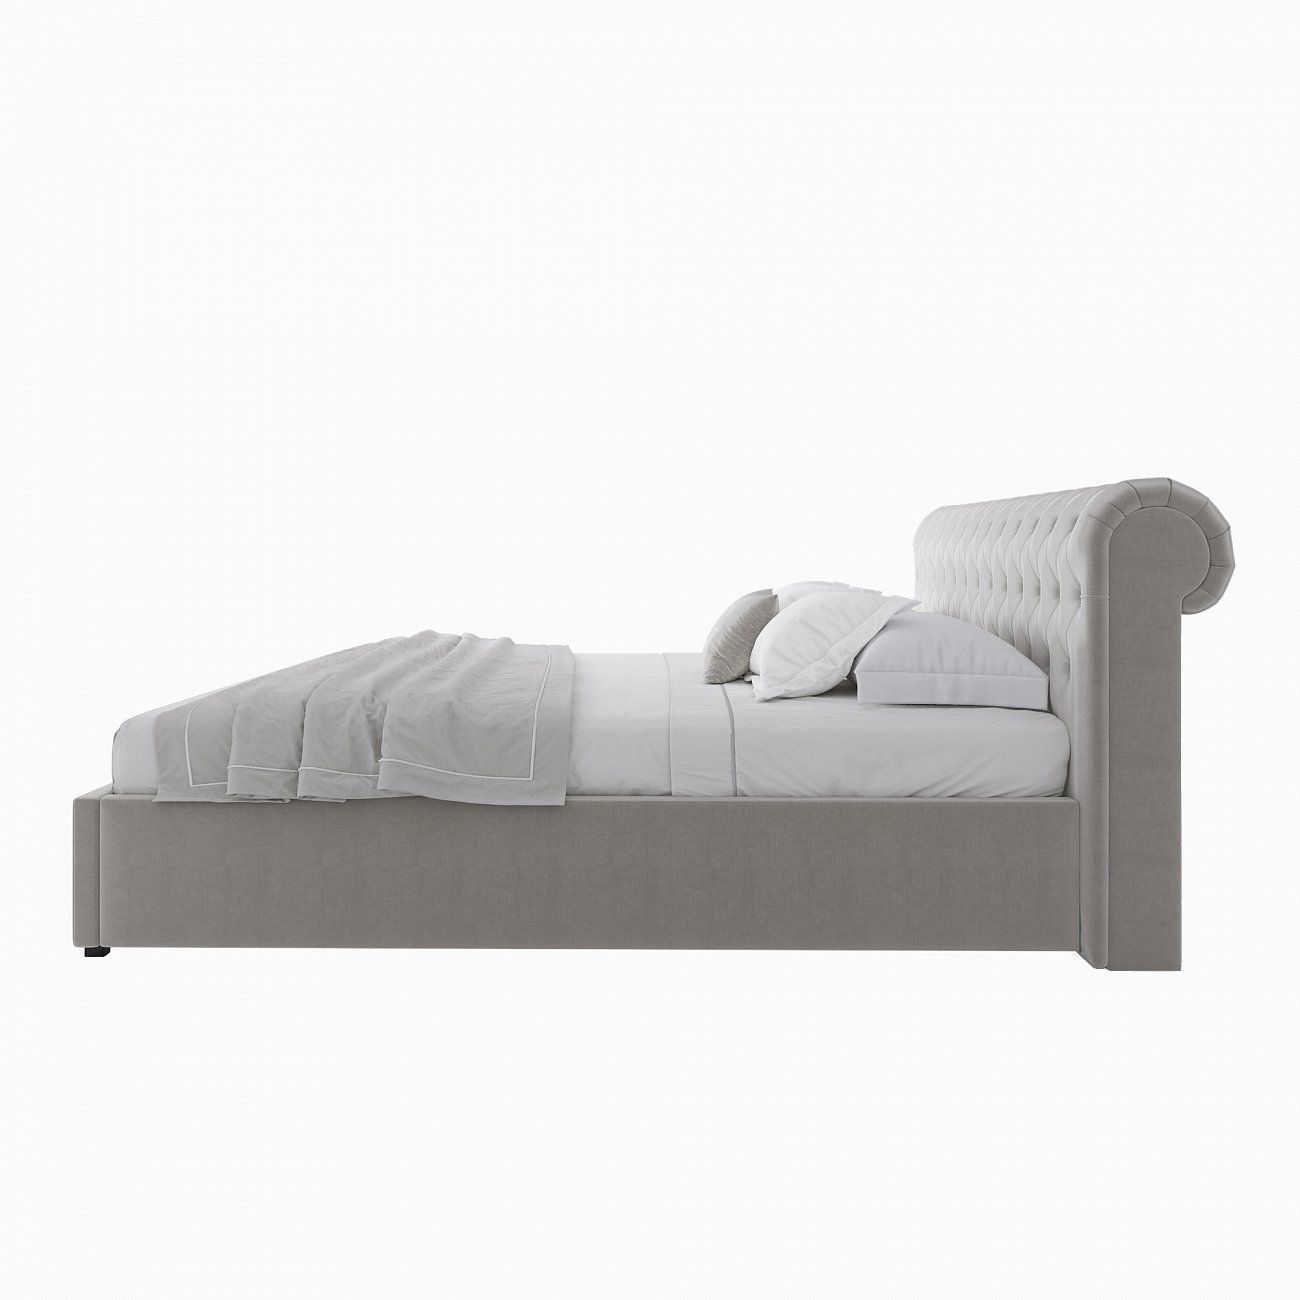 Euro bed with upholstered headboard 200x200 cm Sweet Dreams